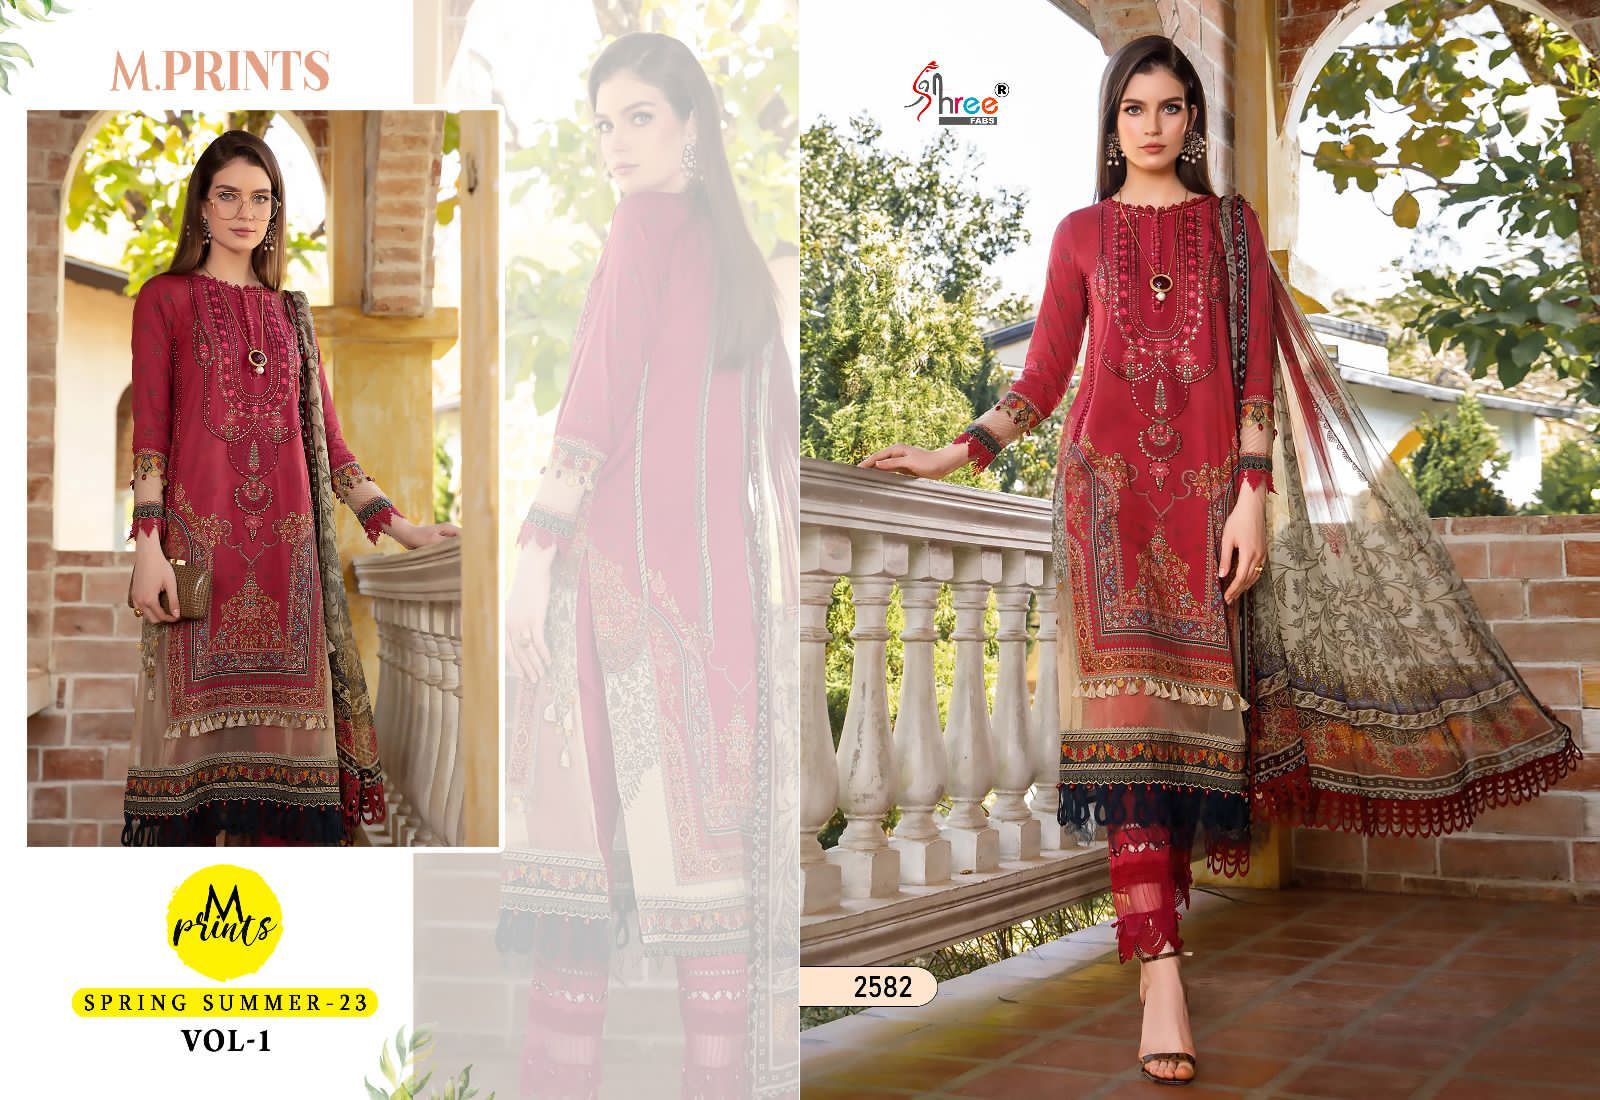 Shree M Prints Spring Summer 23 Vol 1 collection 5